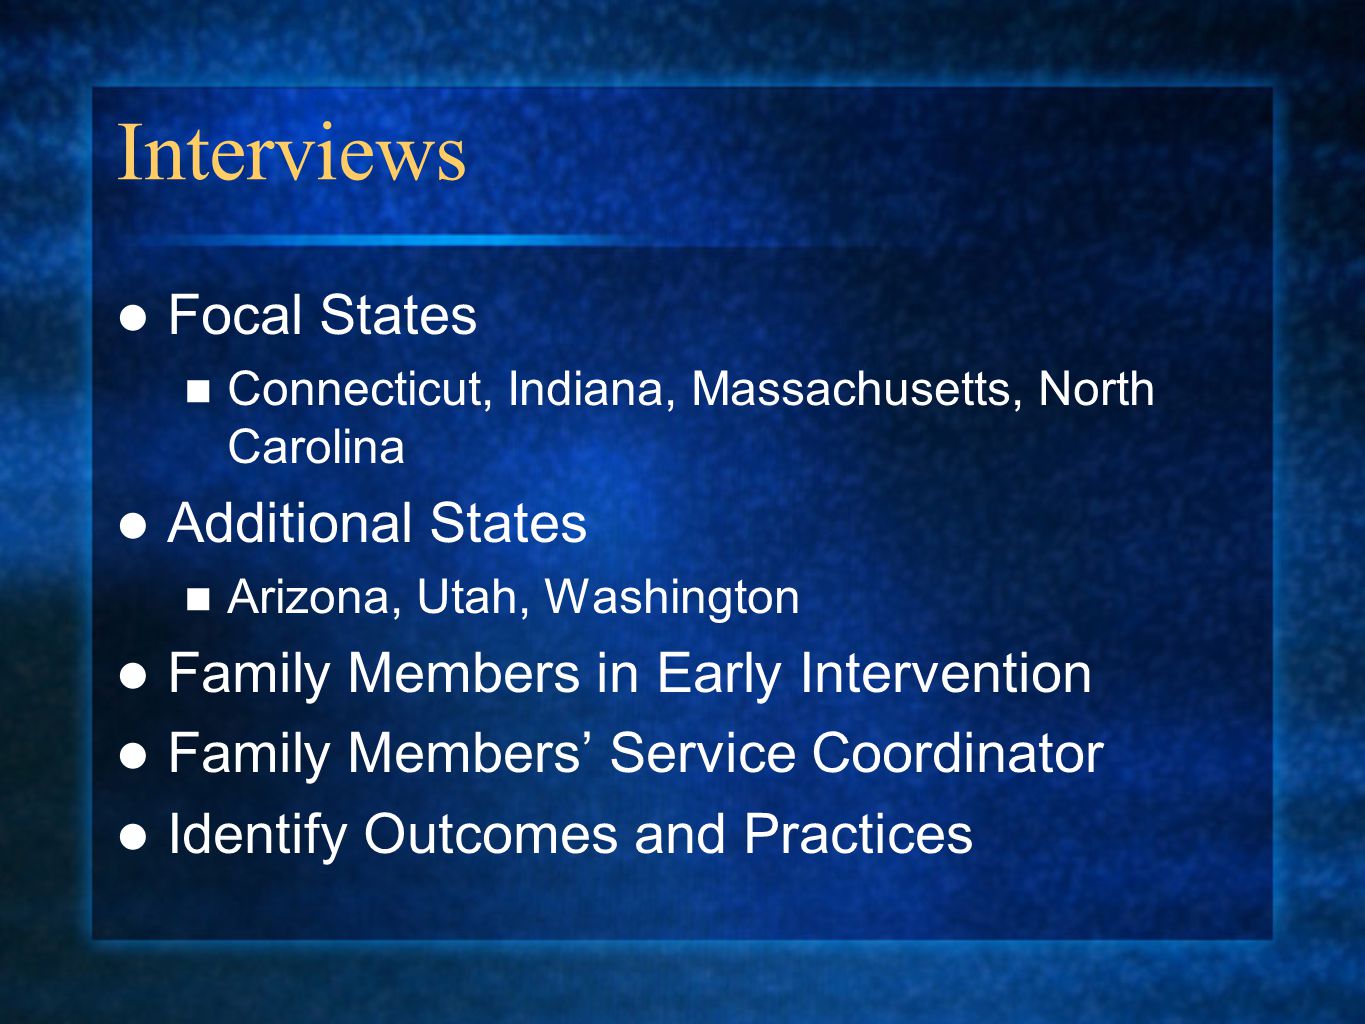 Interviews Focal States Connecticut, Indiana, Massachusetts, North Carolina Additional States Arizona, Utah, Washington Family Members in Early Intervention Family Members’ Service Coordinator Identify Outcomes and Practices